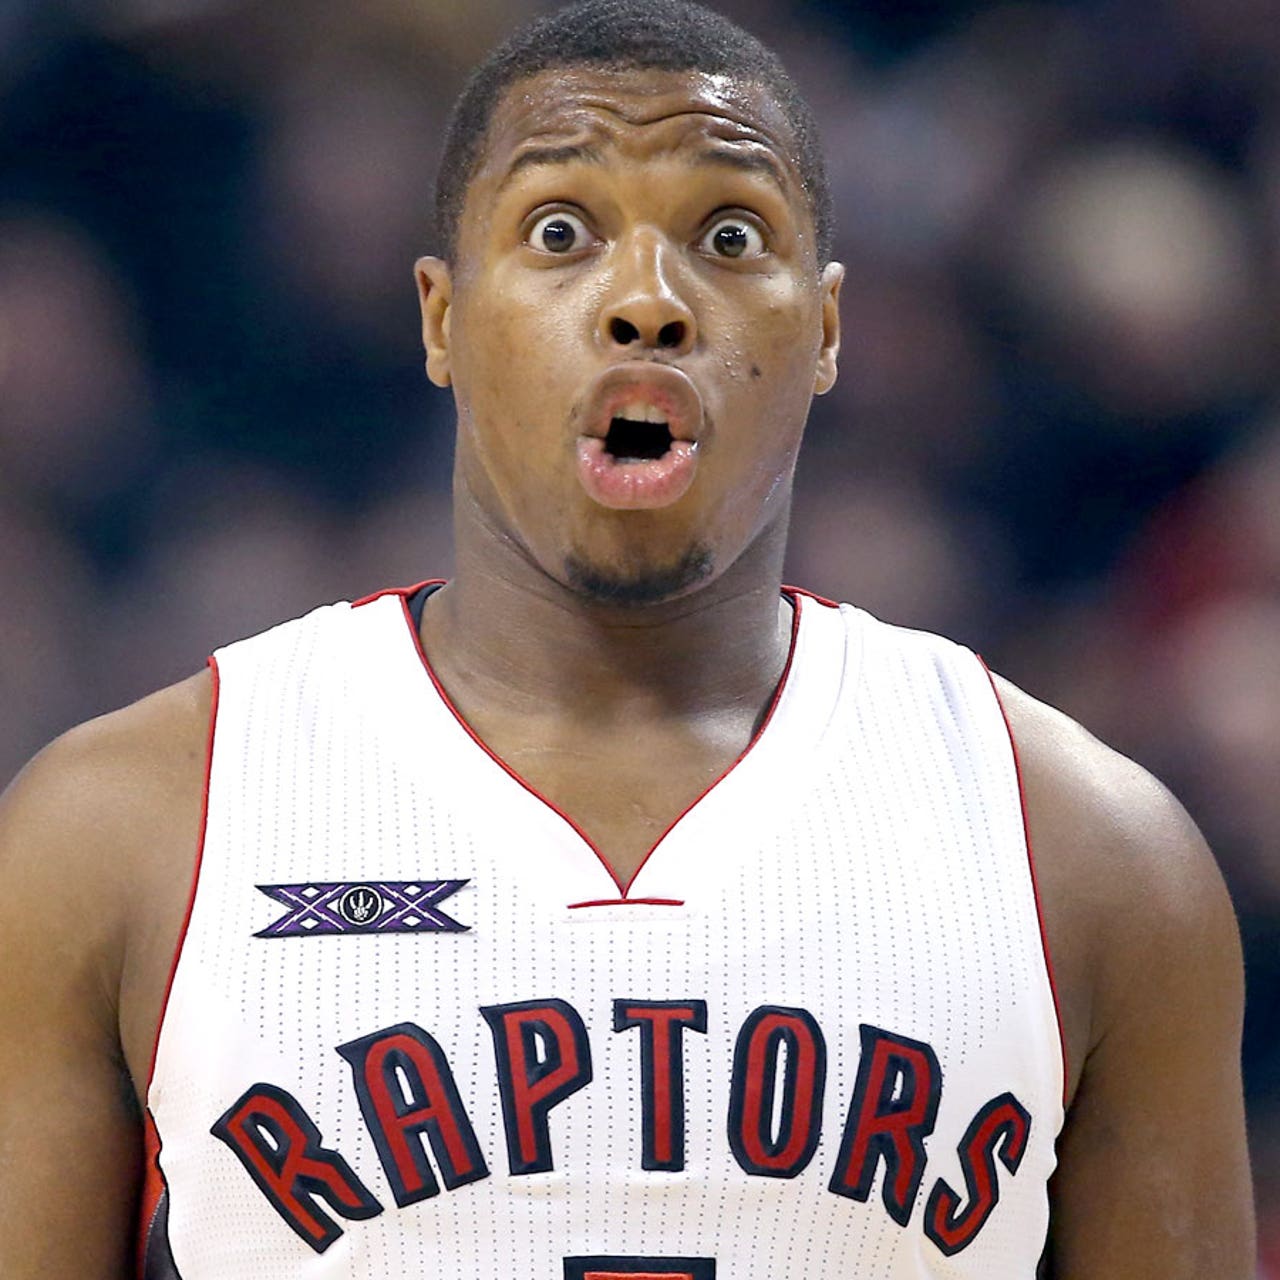 From James Harden to Chris Bosh, the best facial expressions of NBA players